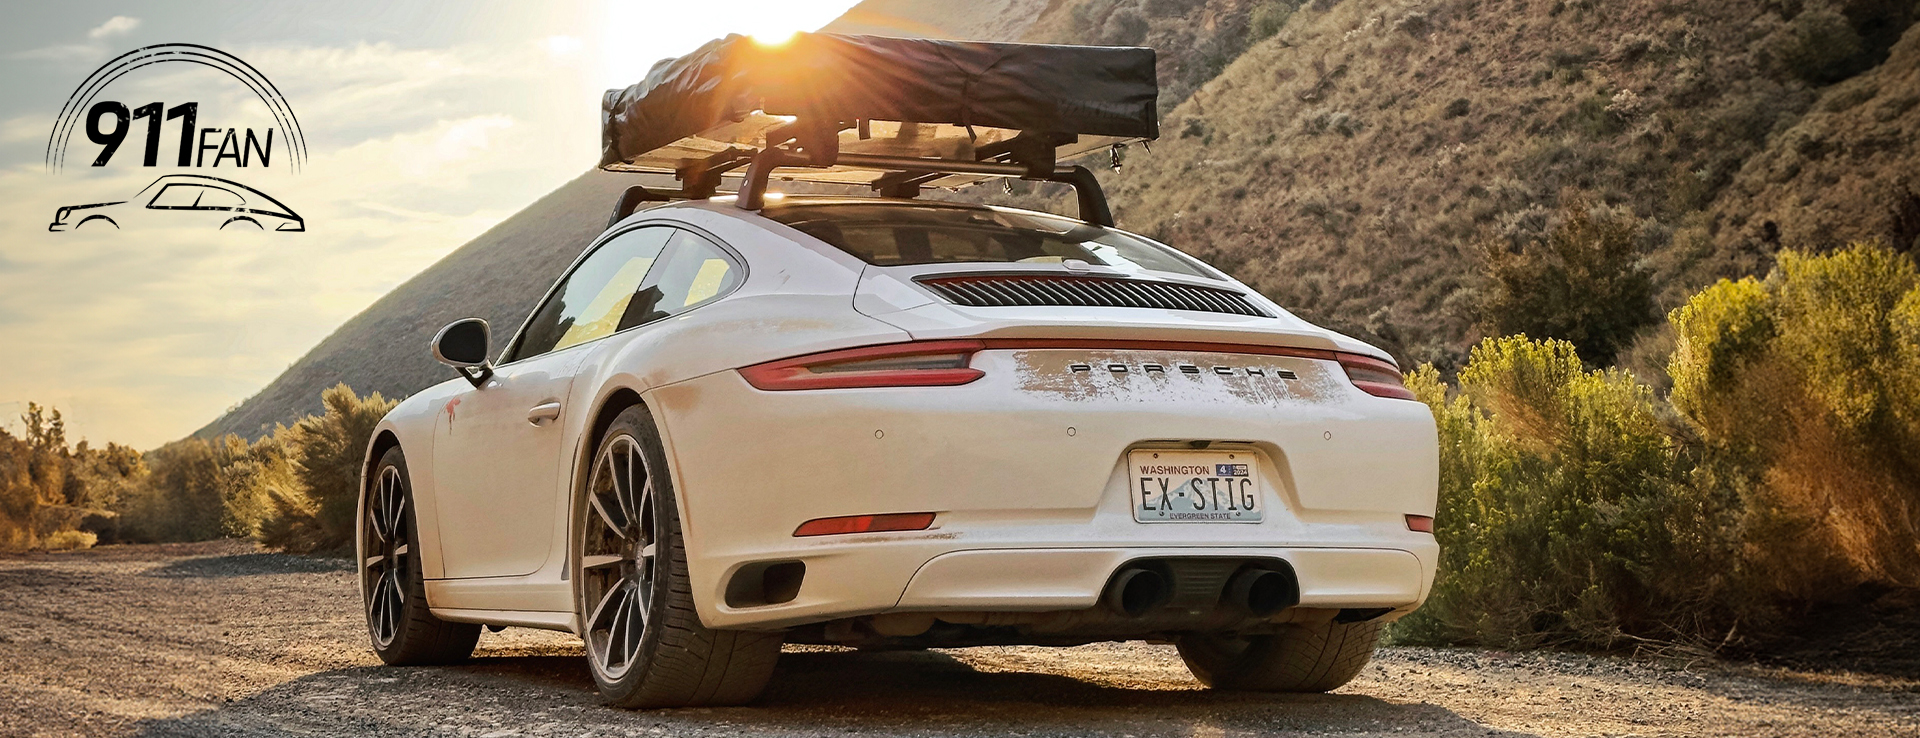 Porsche 911 Carrera 4 with roof tent attached at sunset